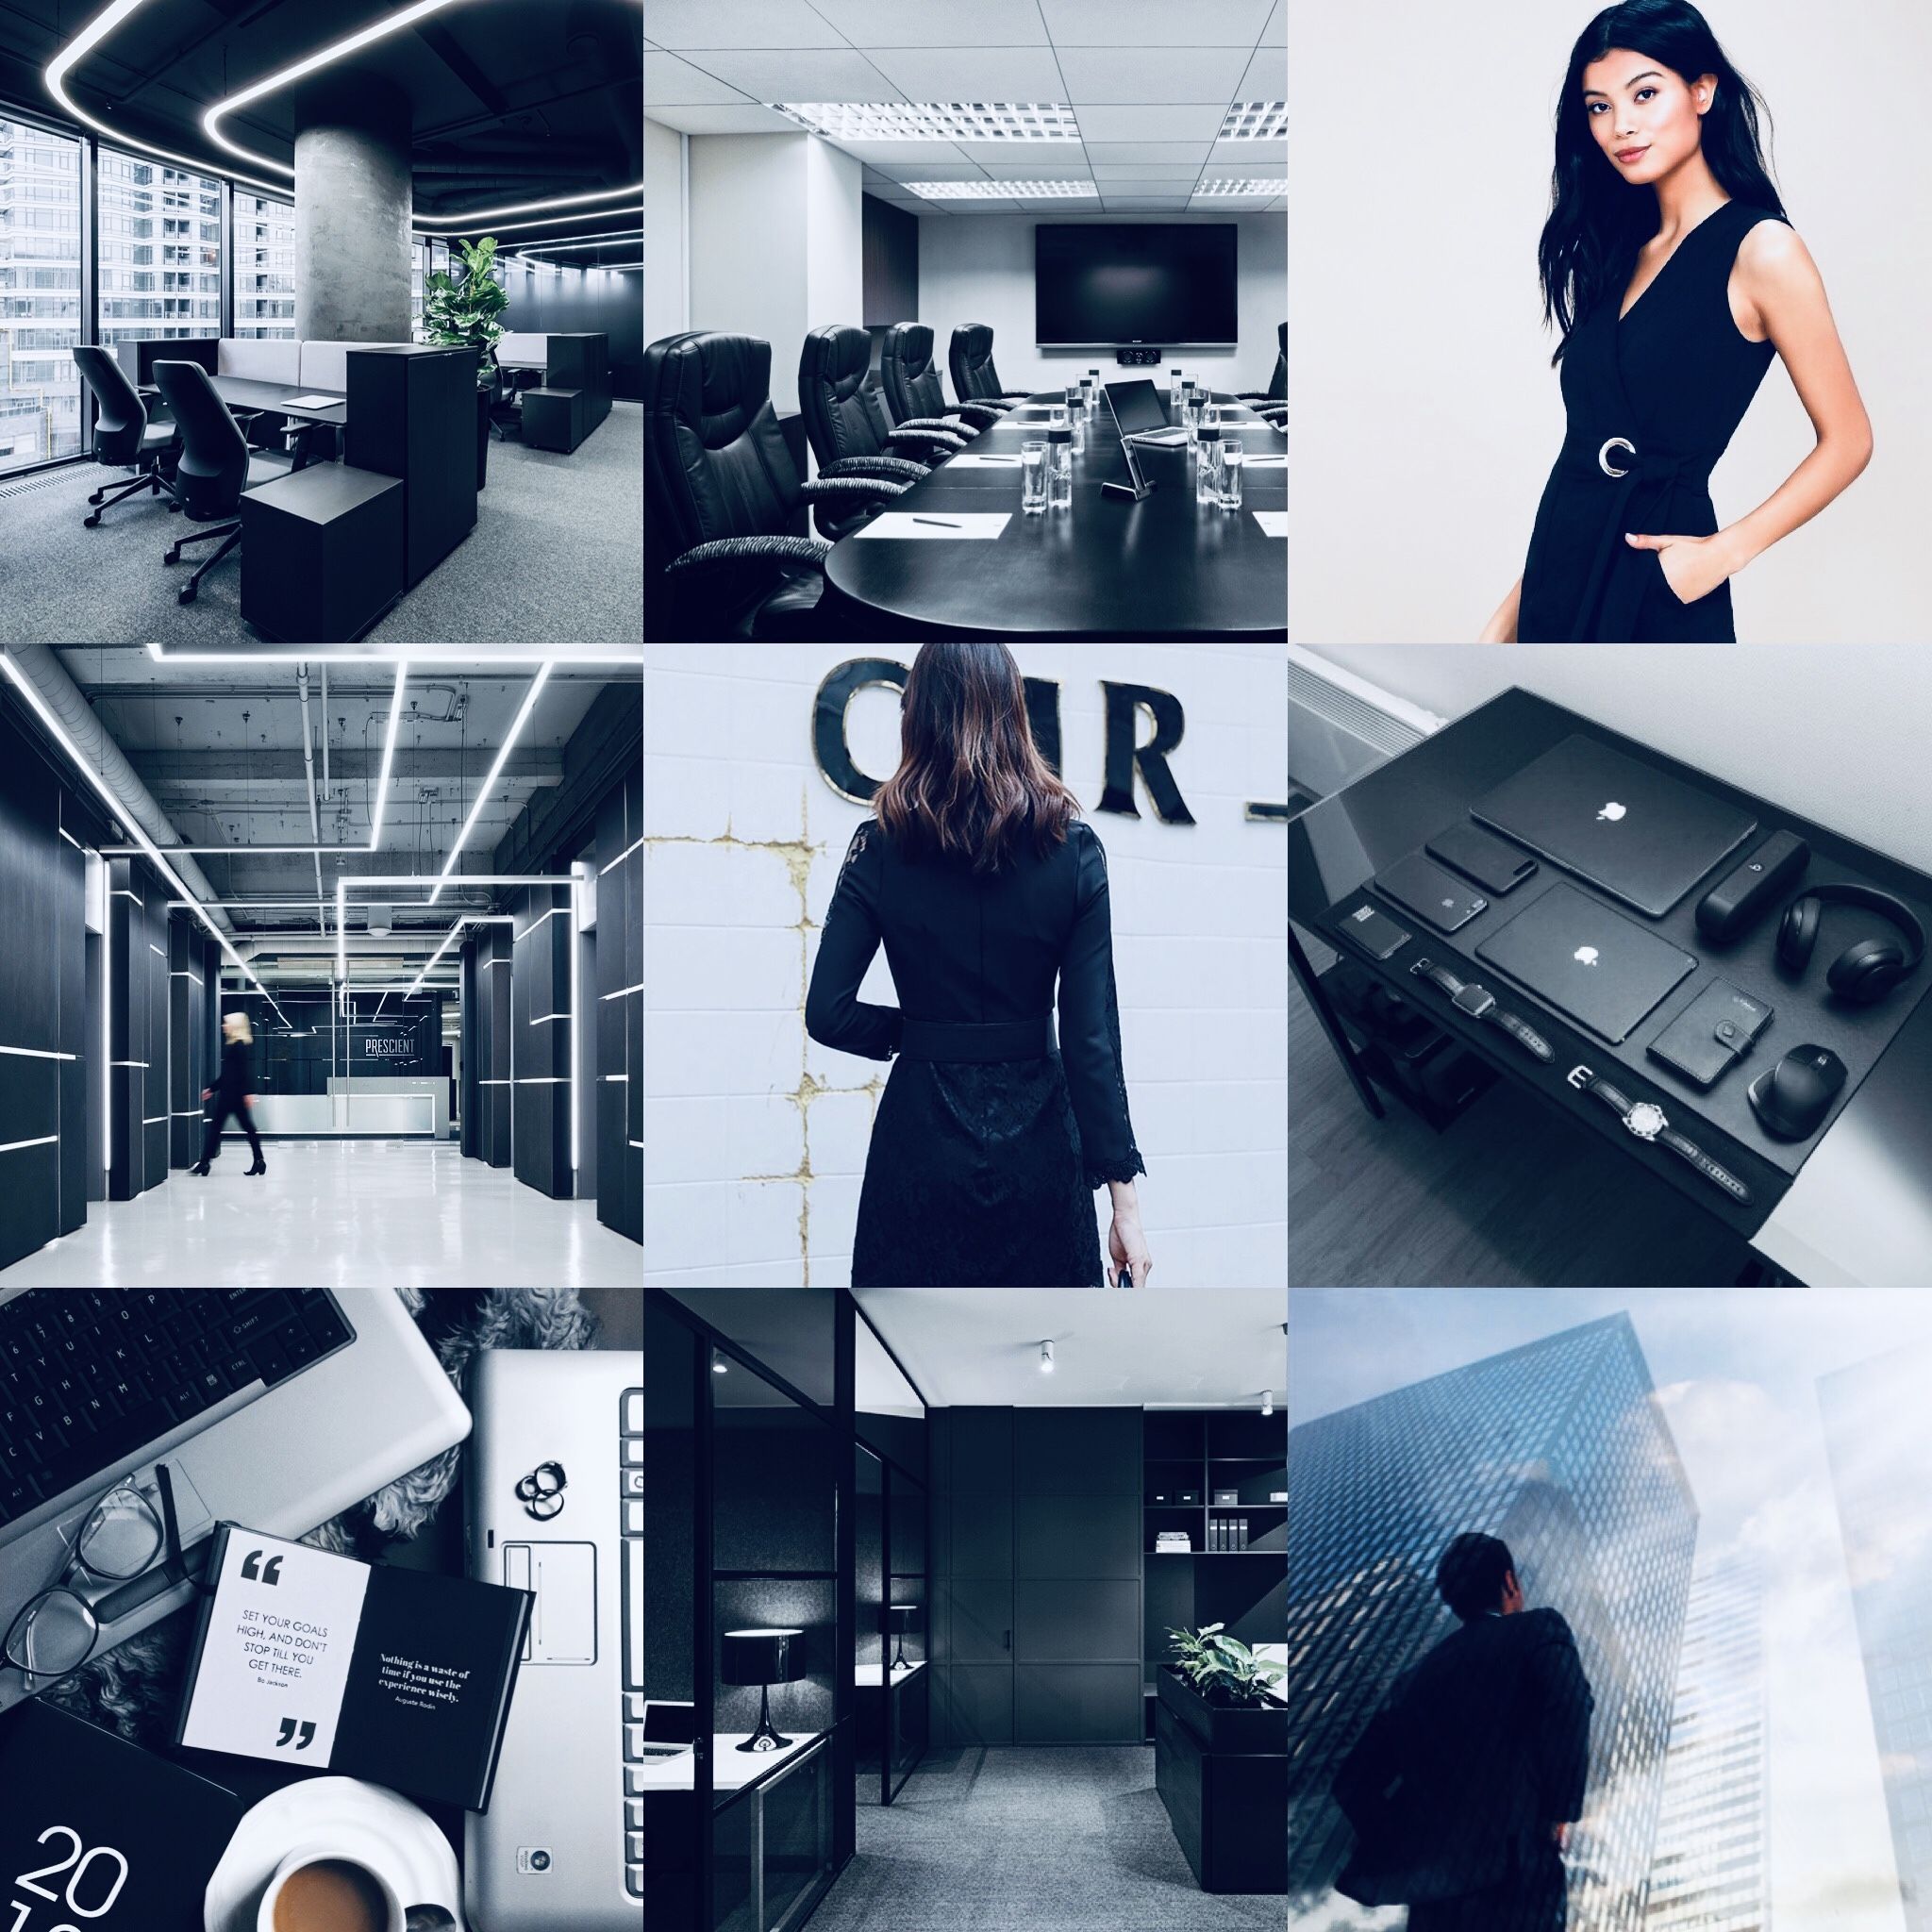 ENTJ: The CEO aesthetic. Business woman successful, Women ceo, Bussines women lifestyle